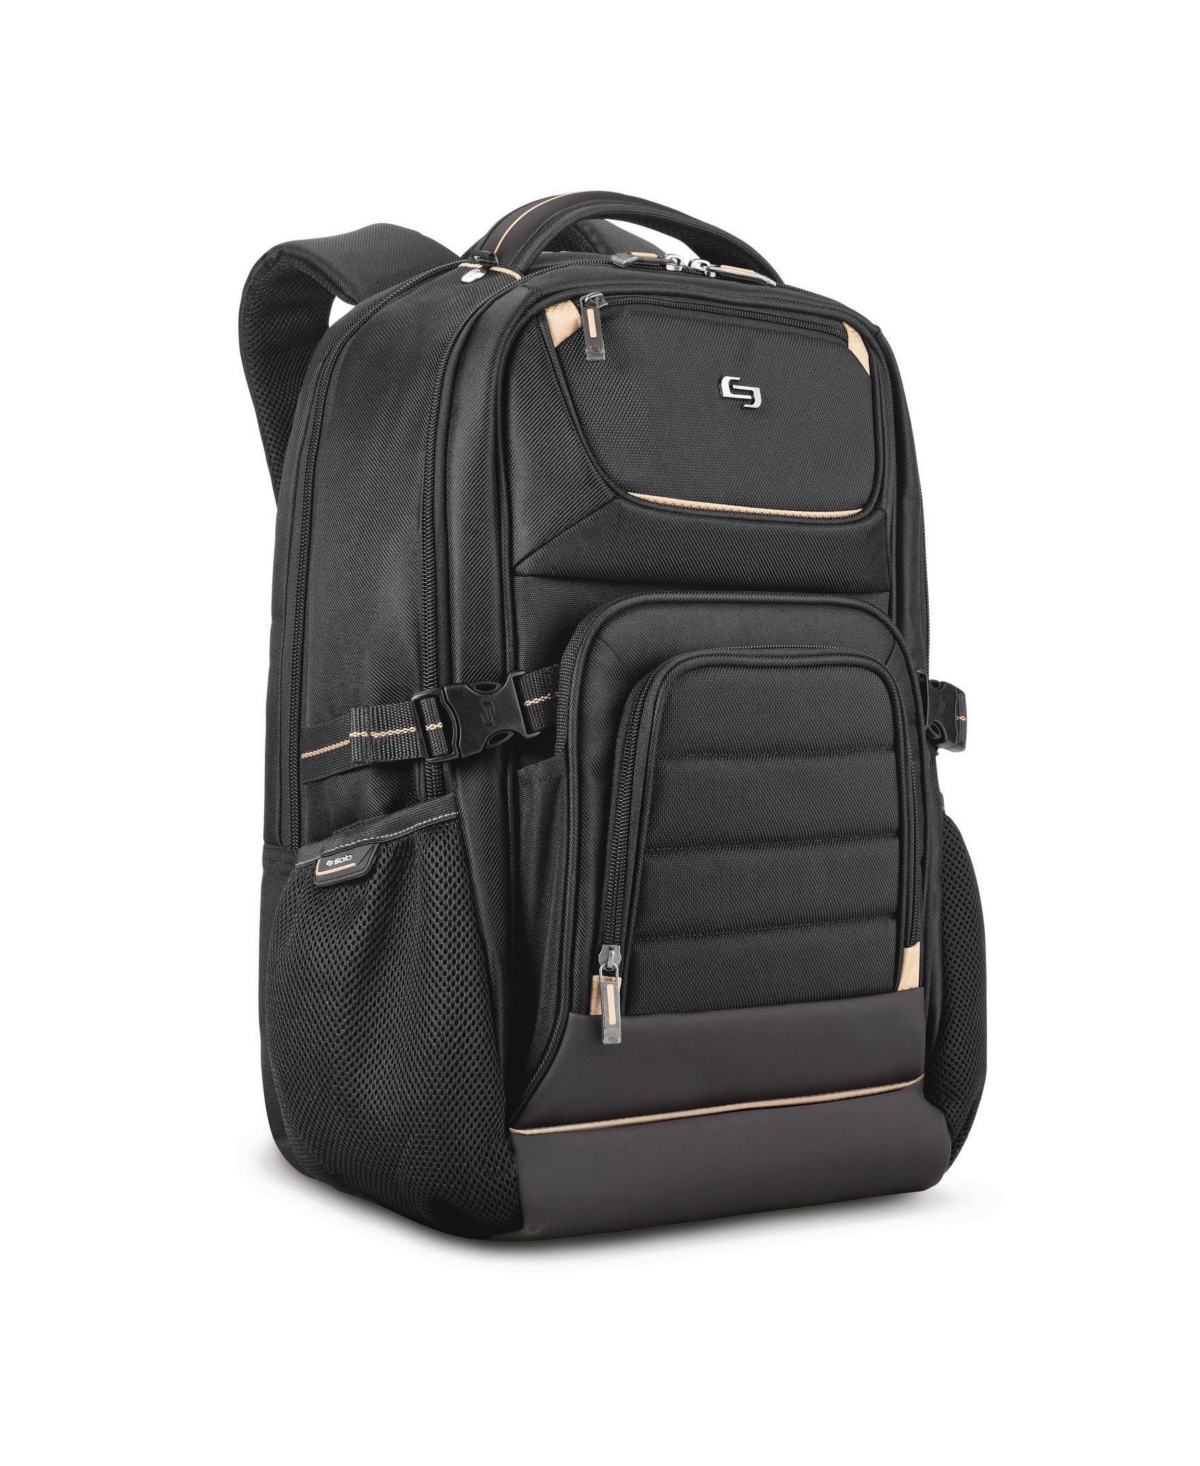 Arc 17.3" Backpack - Black with Gold Accents